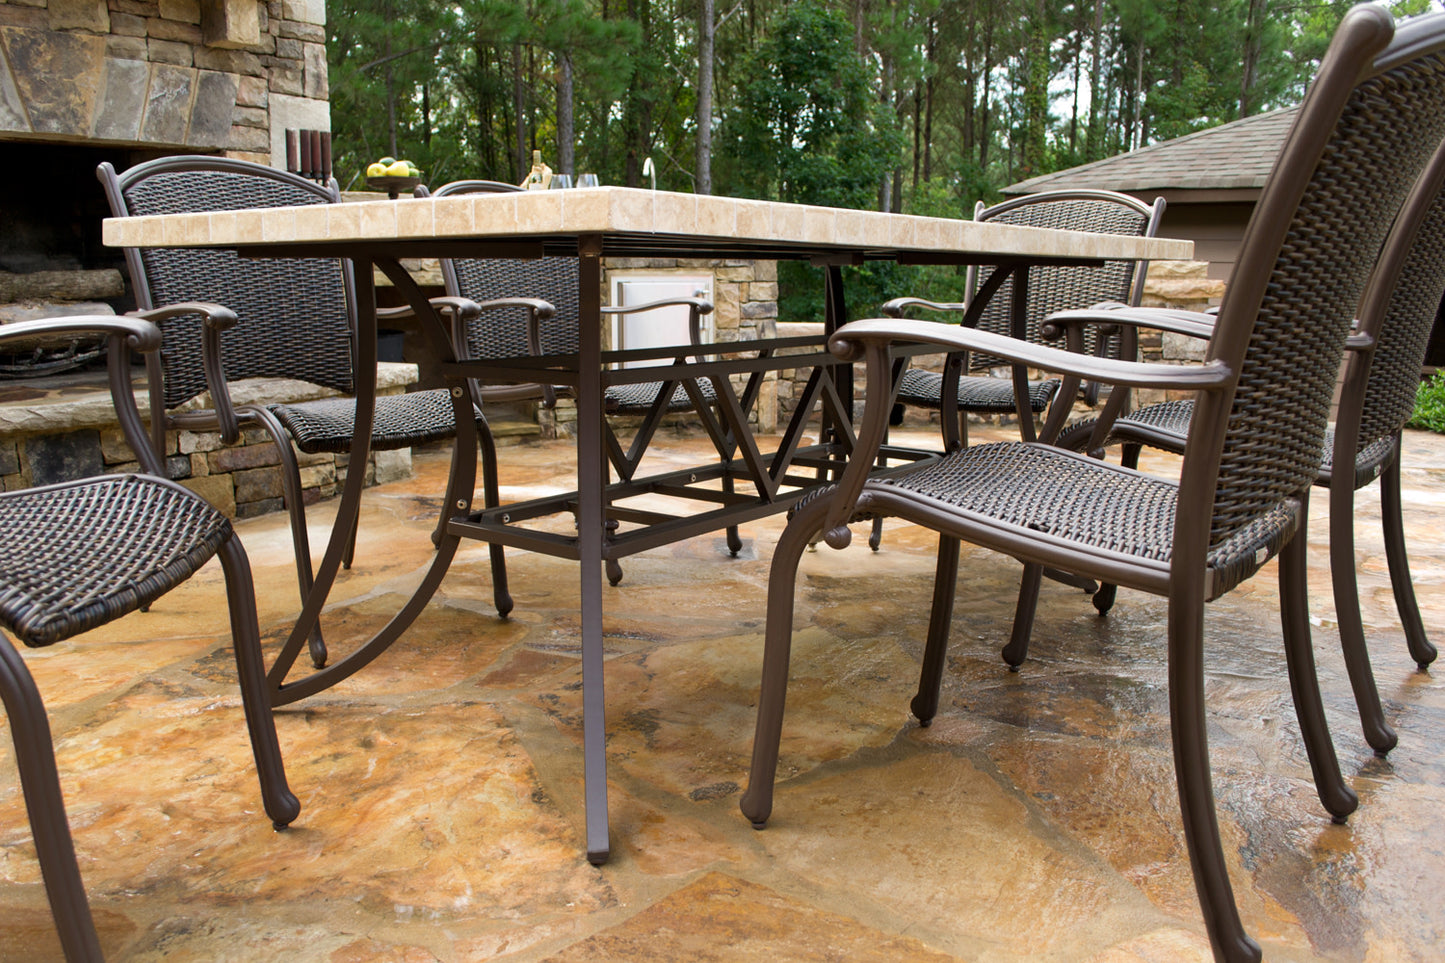 Marquesas 7Pc Dining Set (6 chairs, 70" stone table)